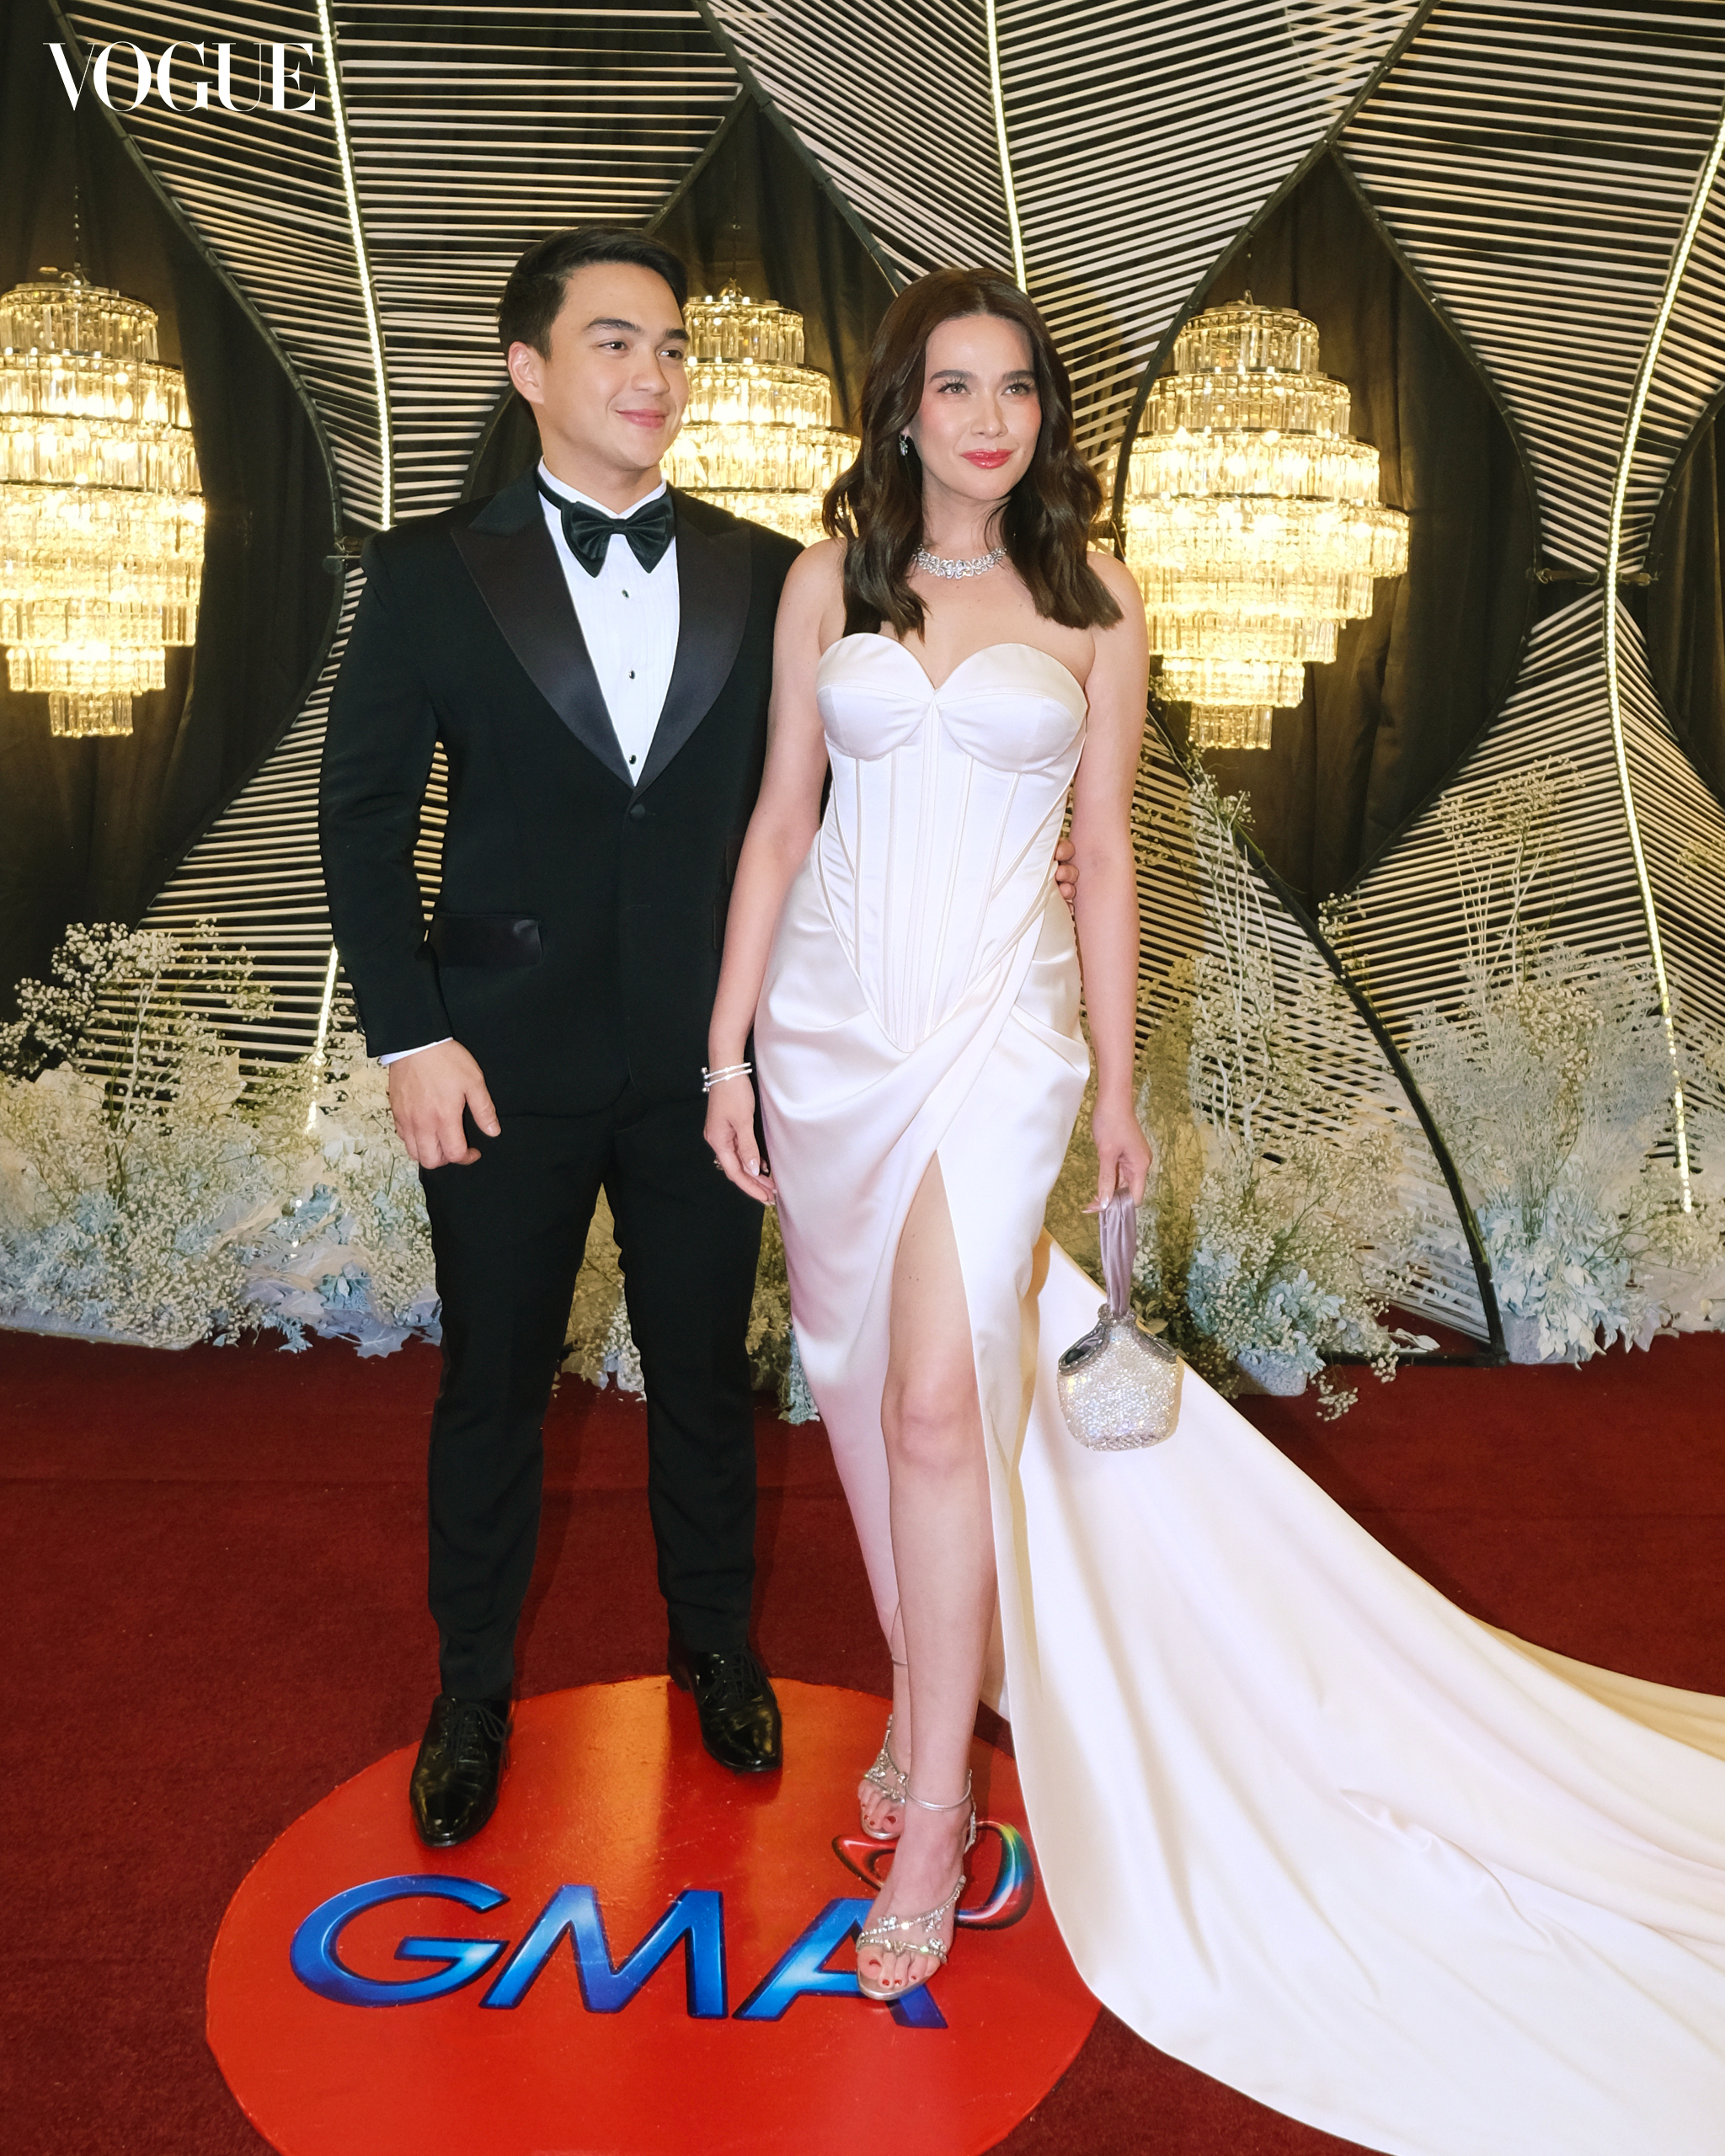 Bea and Dominic arrive on the GMA Gala red carpet.